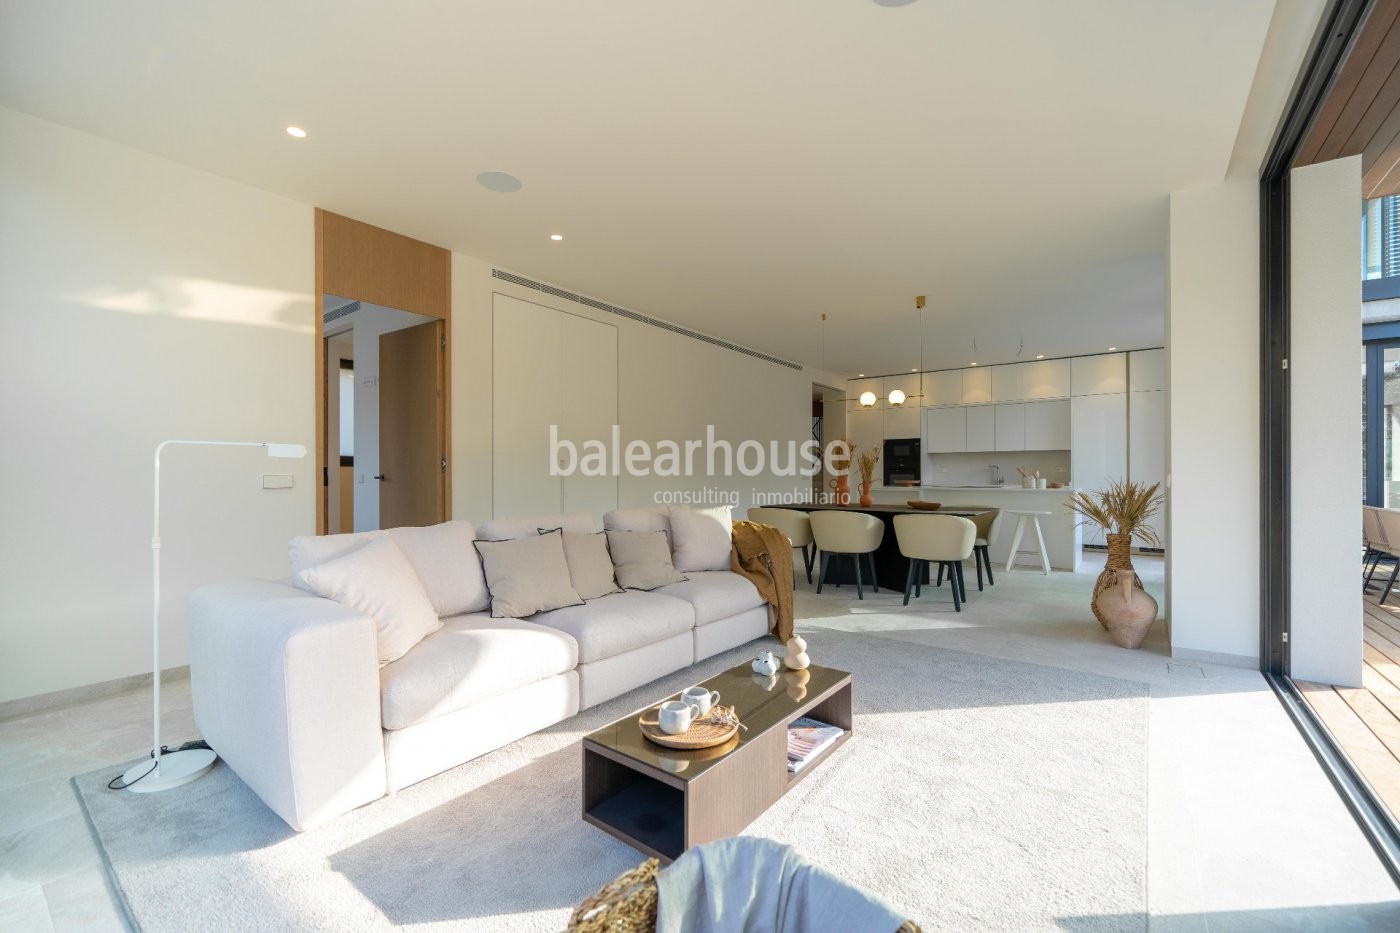 Modern newly built ground floor apartment in Palma with large outdoor garden and terraces